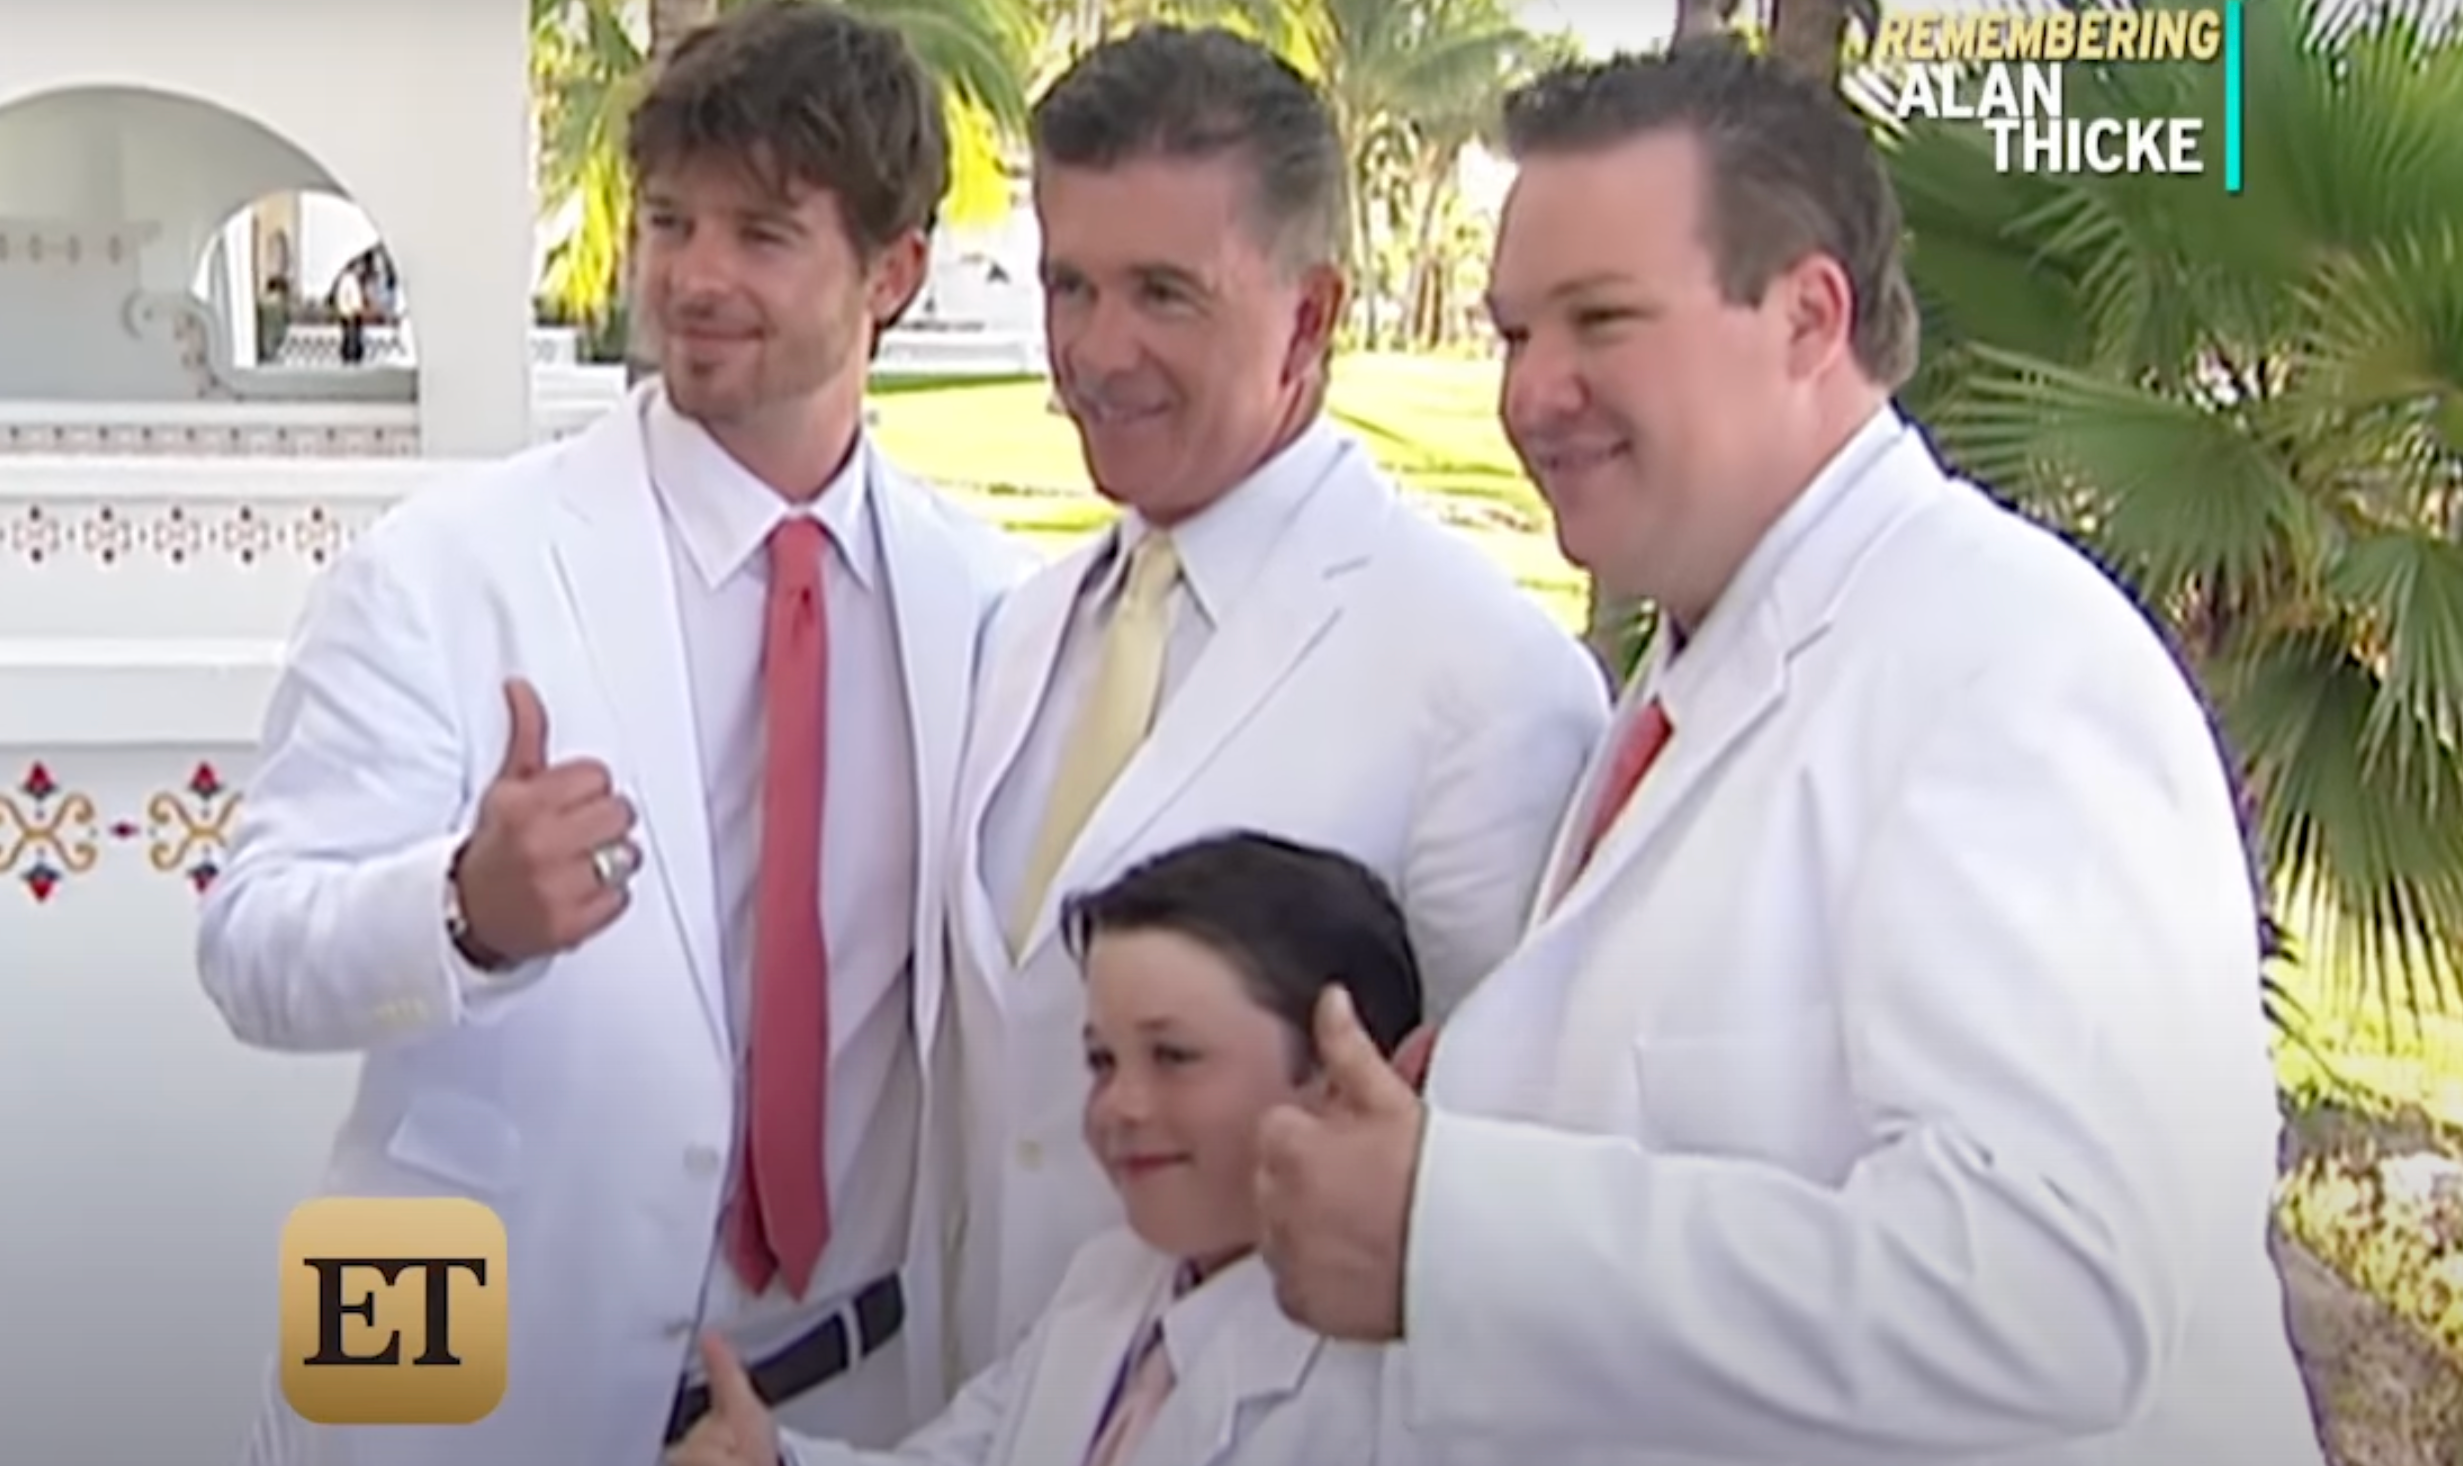 Robin Thicke, Alan Thicke, Carter Thicke and family member on Alan's wedding day to Tanya Callau on May 7, 2005 in Cabo San Lucas, Mexico | Source: YouTube/EntertainmentTonight